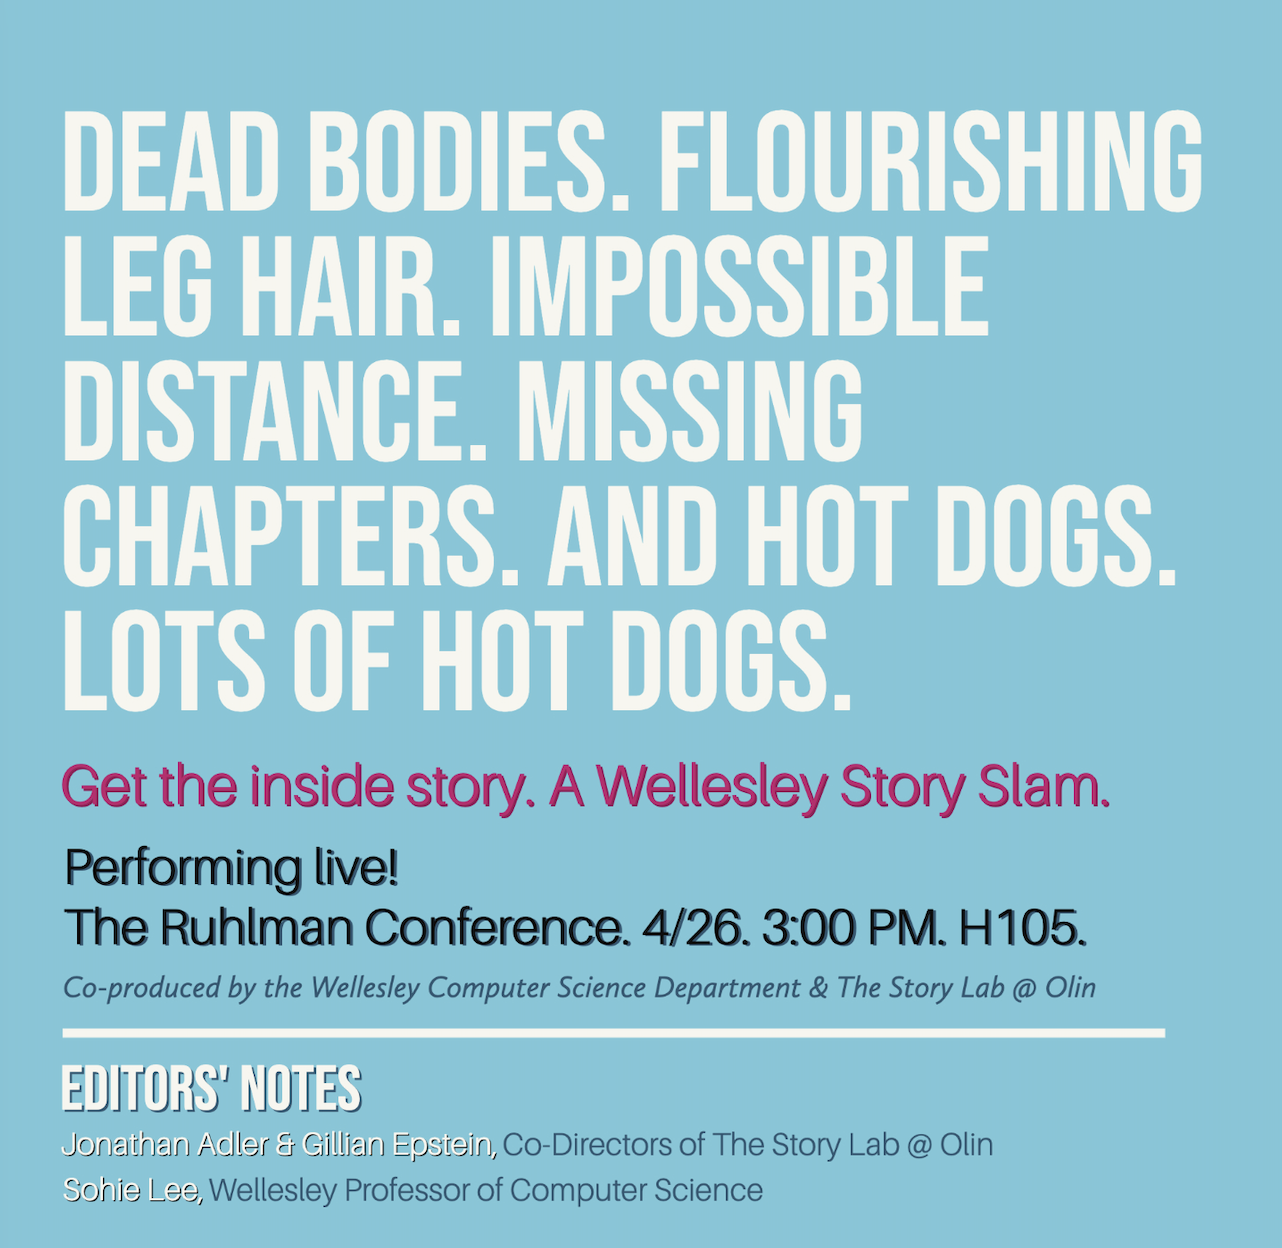 Advertising flyer for story slam with storyteller names and story titles, date and event location.